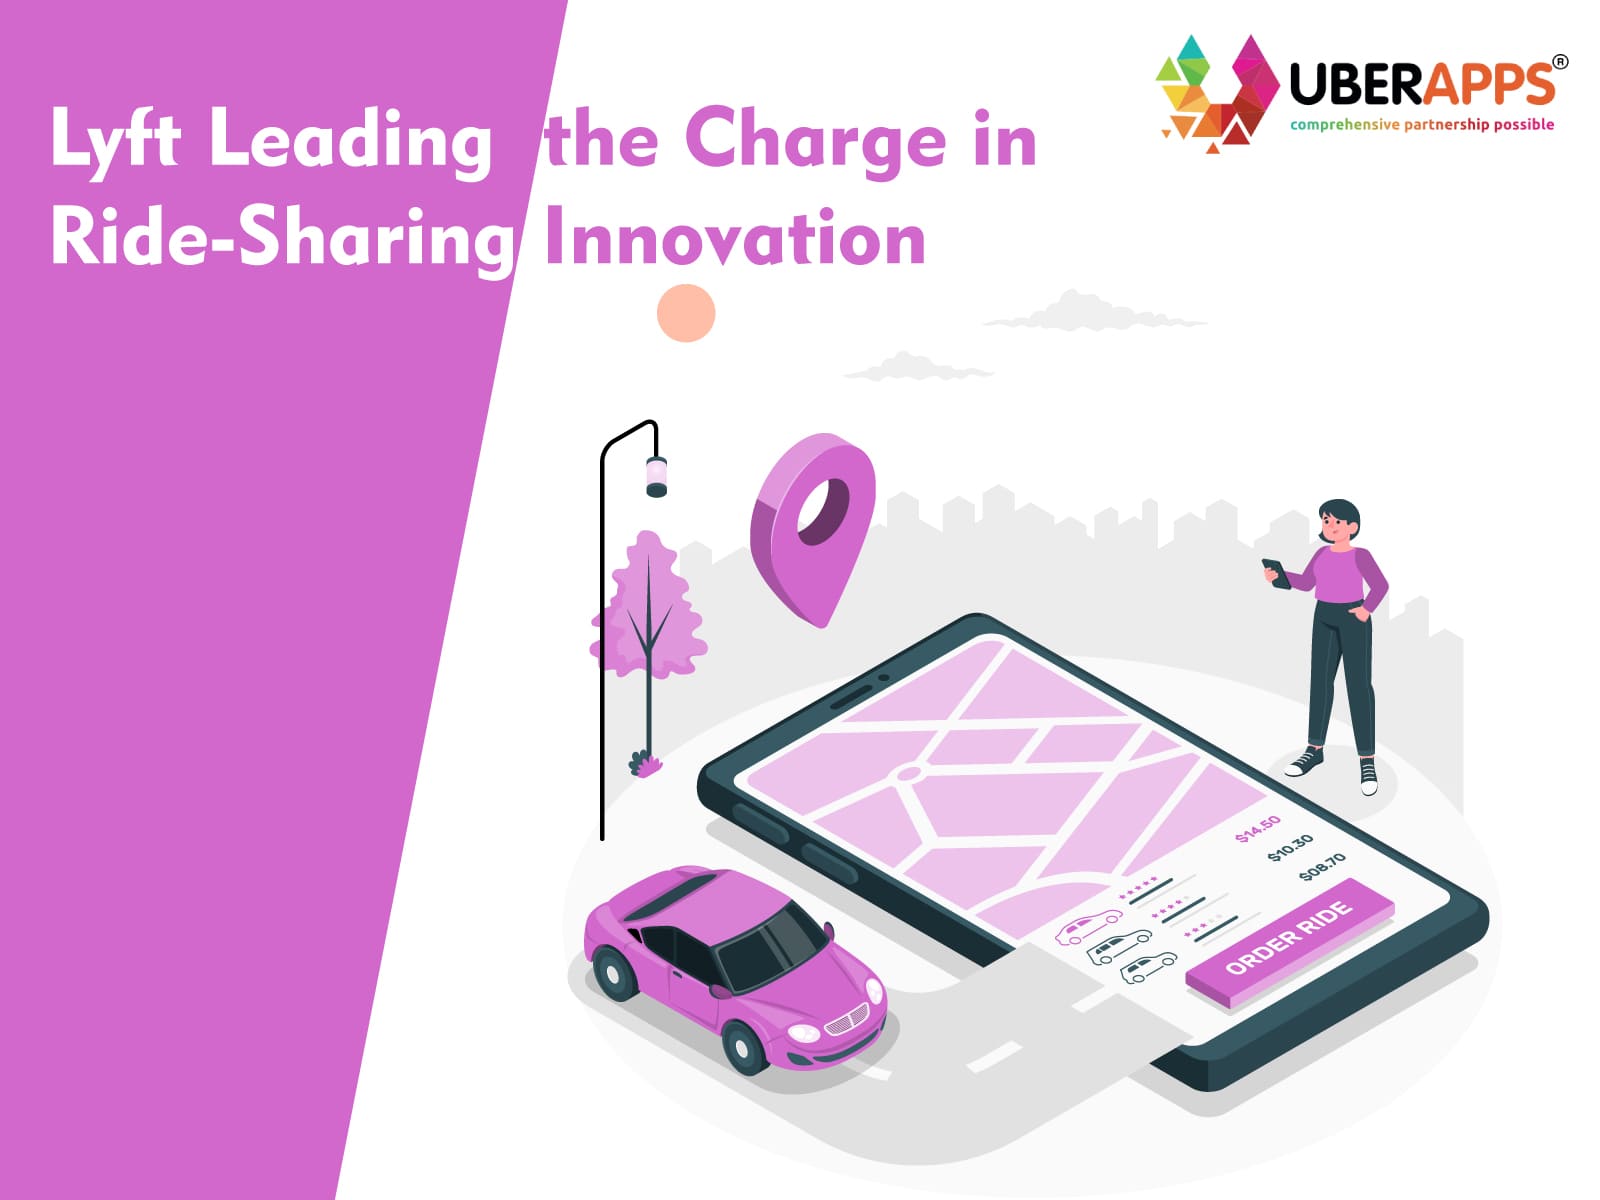 Lyft: Leading the Charge in Ride-Sharing Innovation